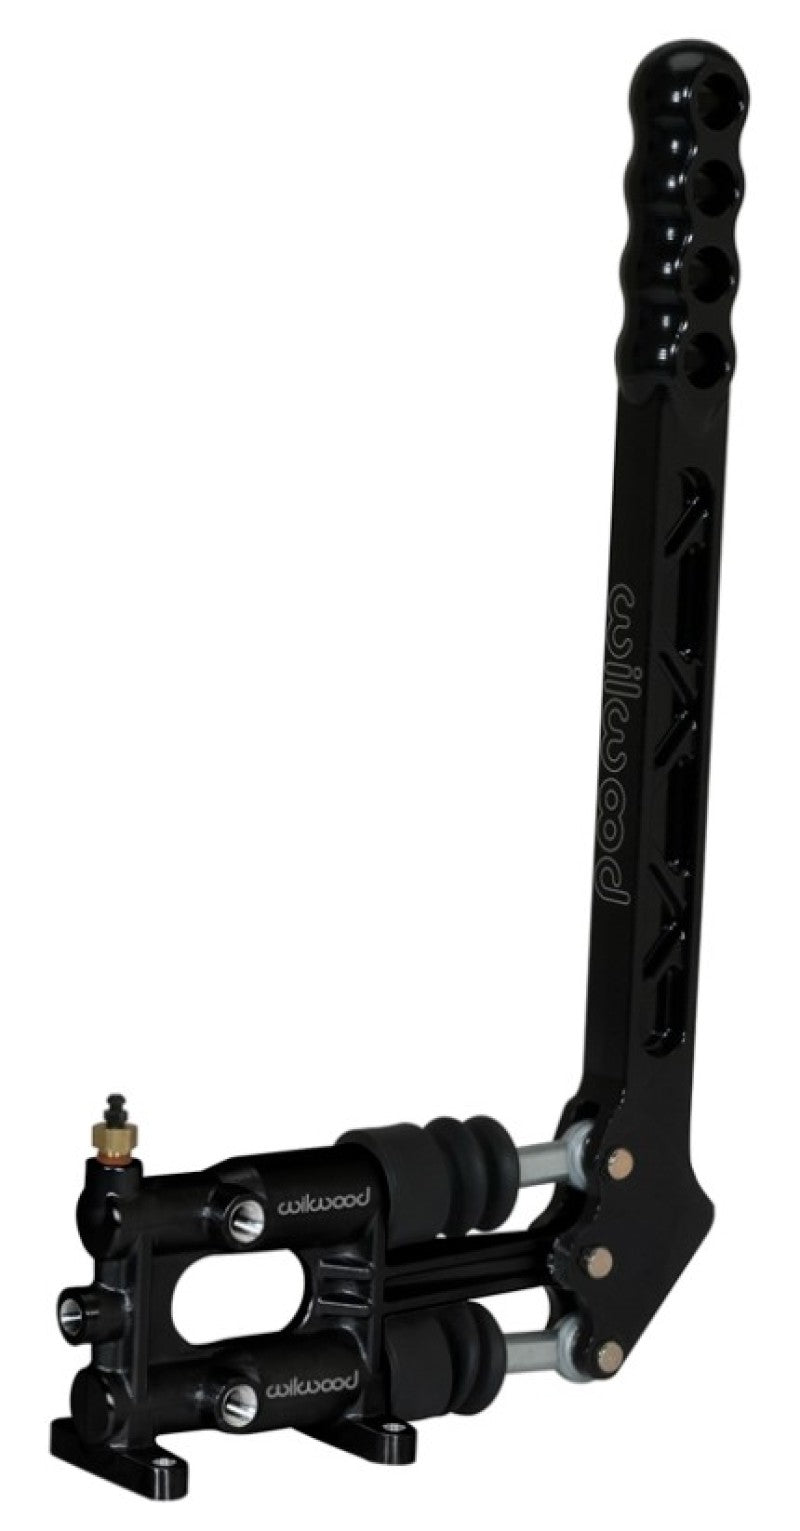 Wilwood Hand Cutting Brake Assembly - Dual M/C 11:1 Ratio.